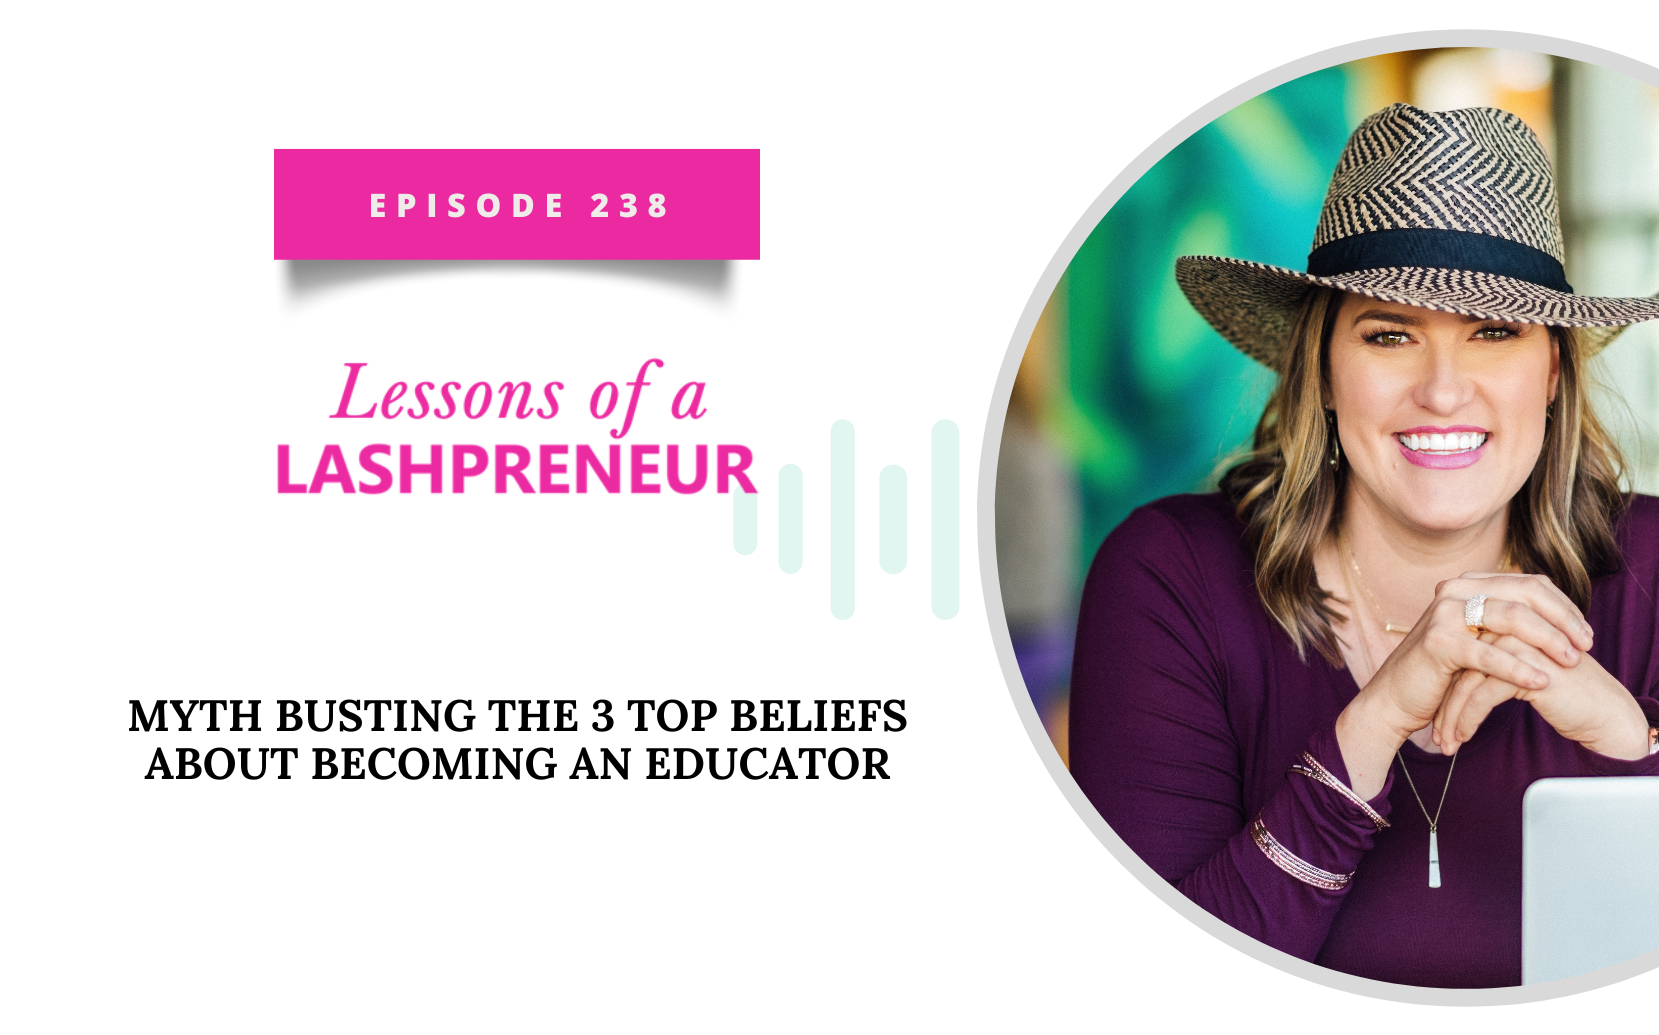 Myth Busting the 3 Top Beliefs About Becoming an Educator